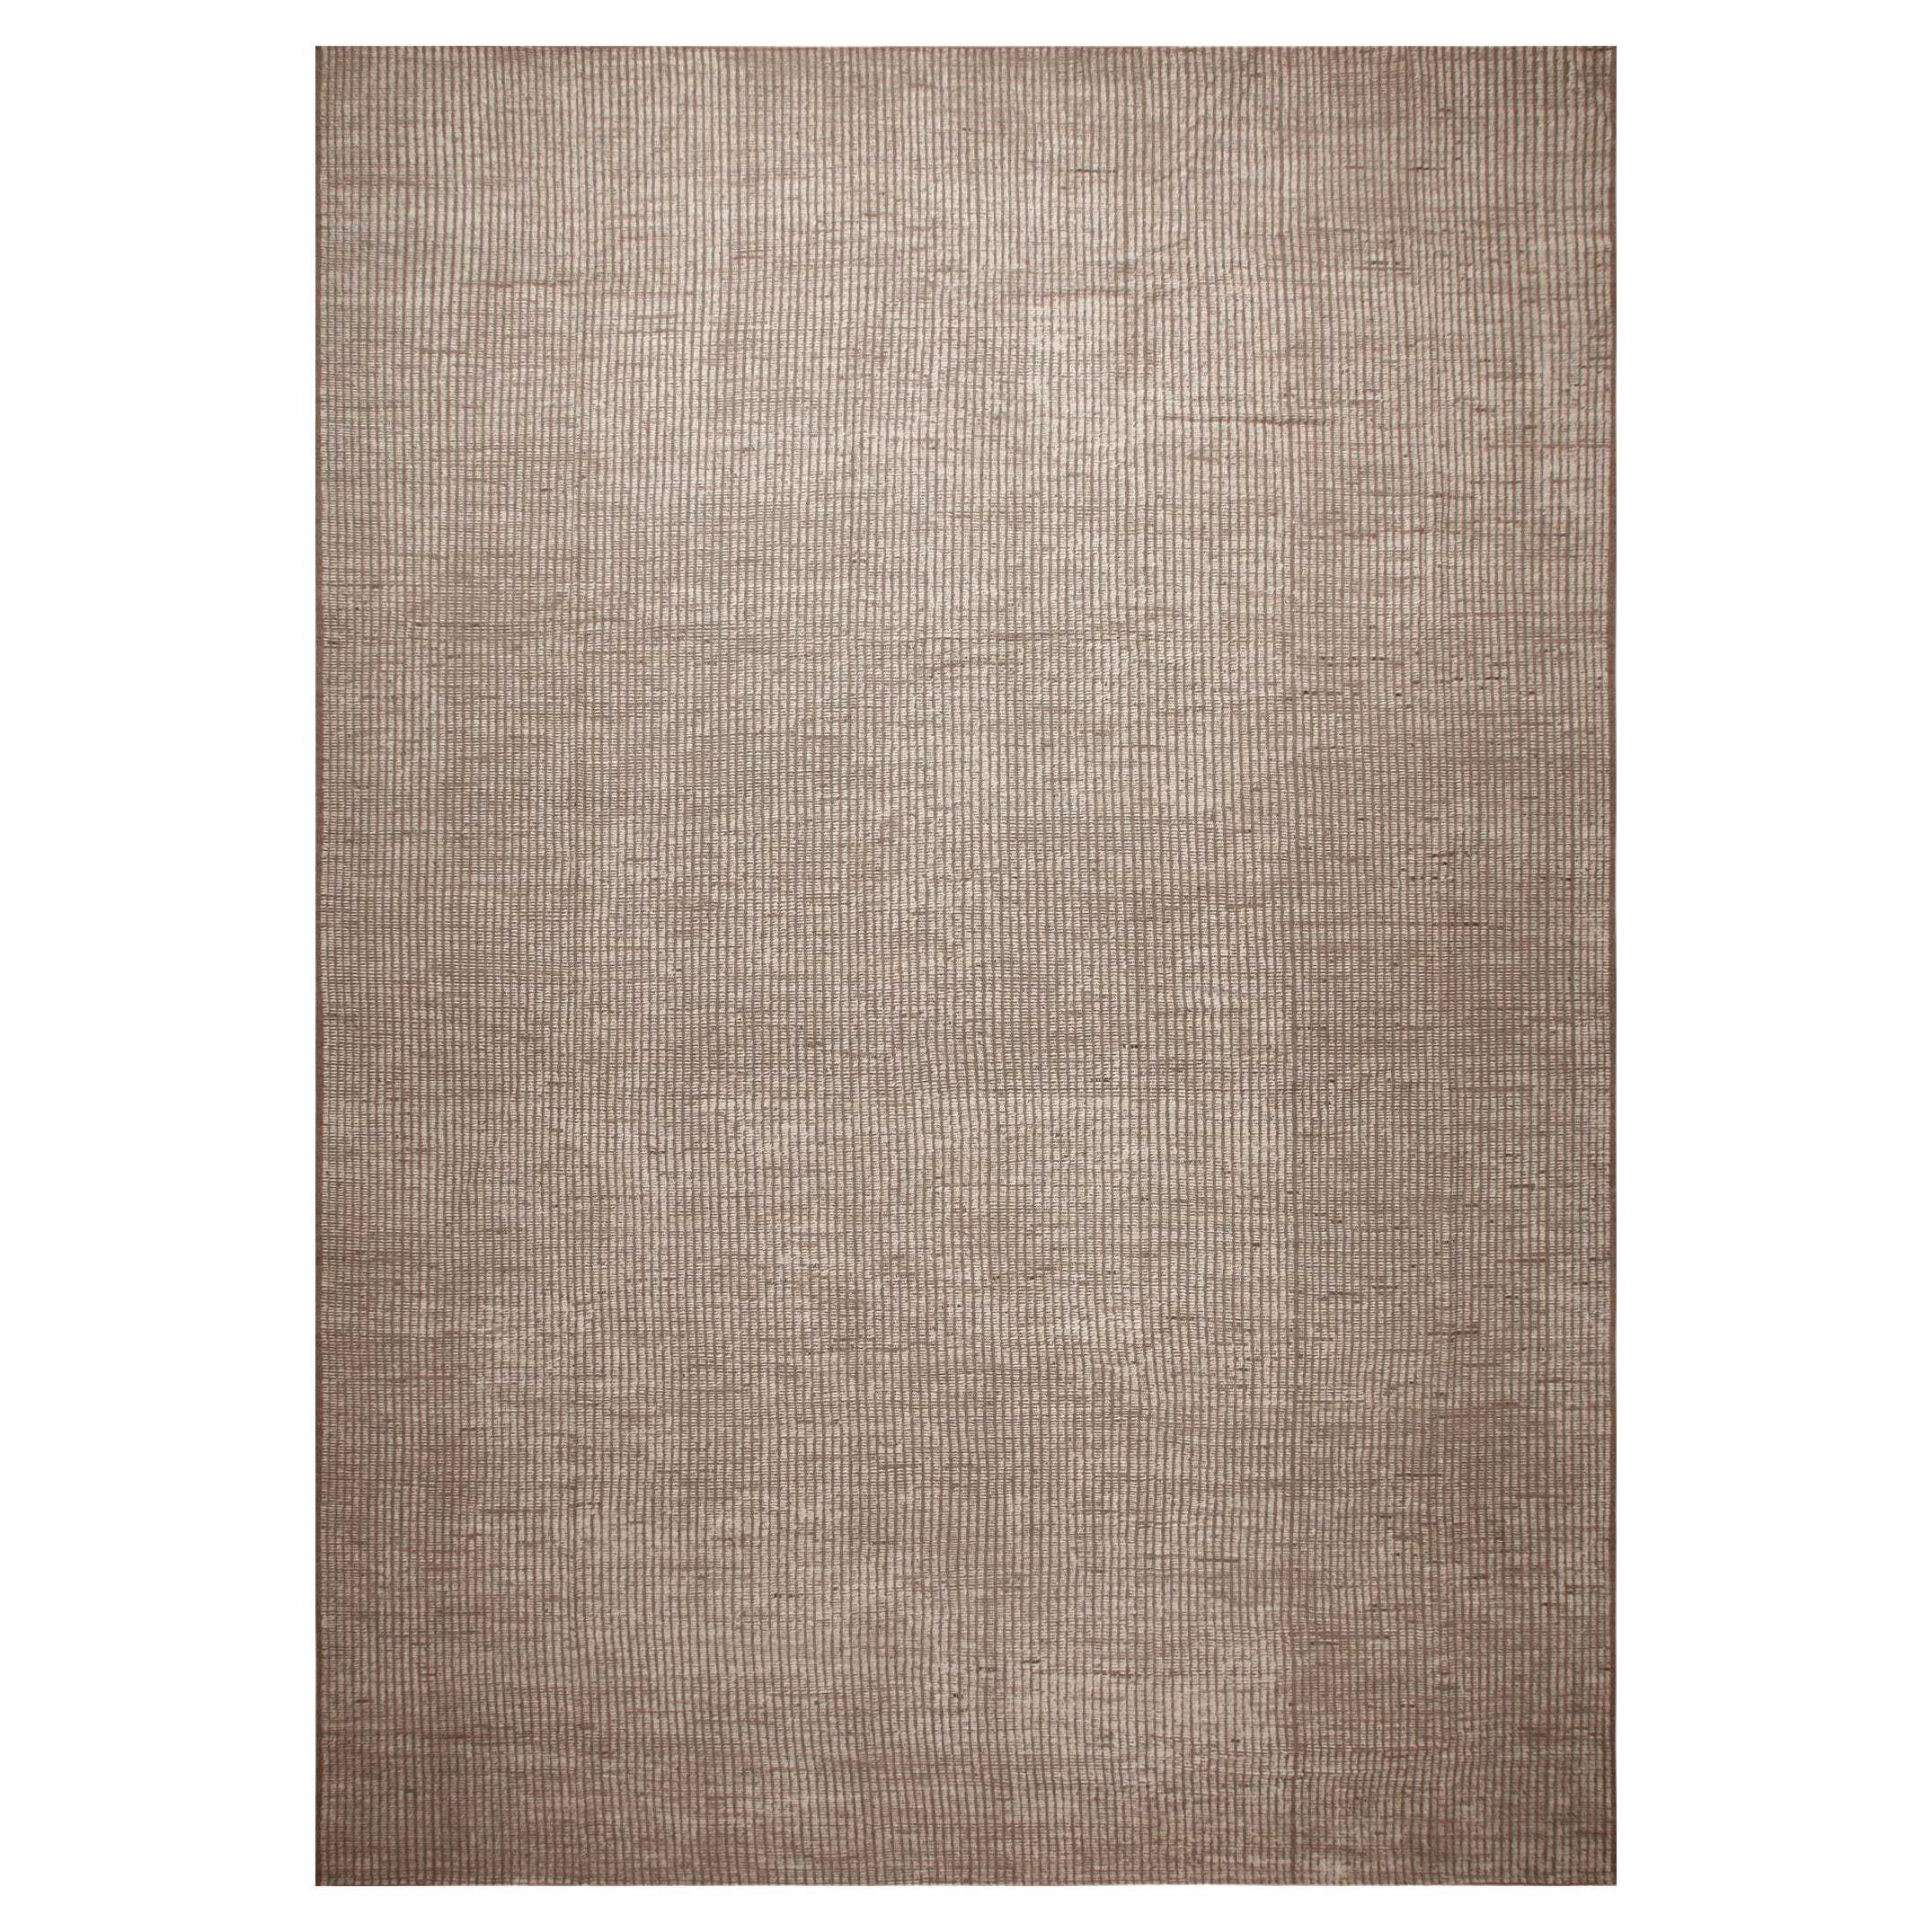 Nazmiyal Collection Modern Neutral Minimalist Abstract Area Rug 15'1" x 21'7"